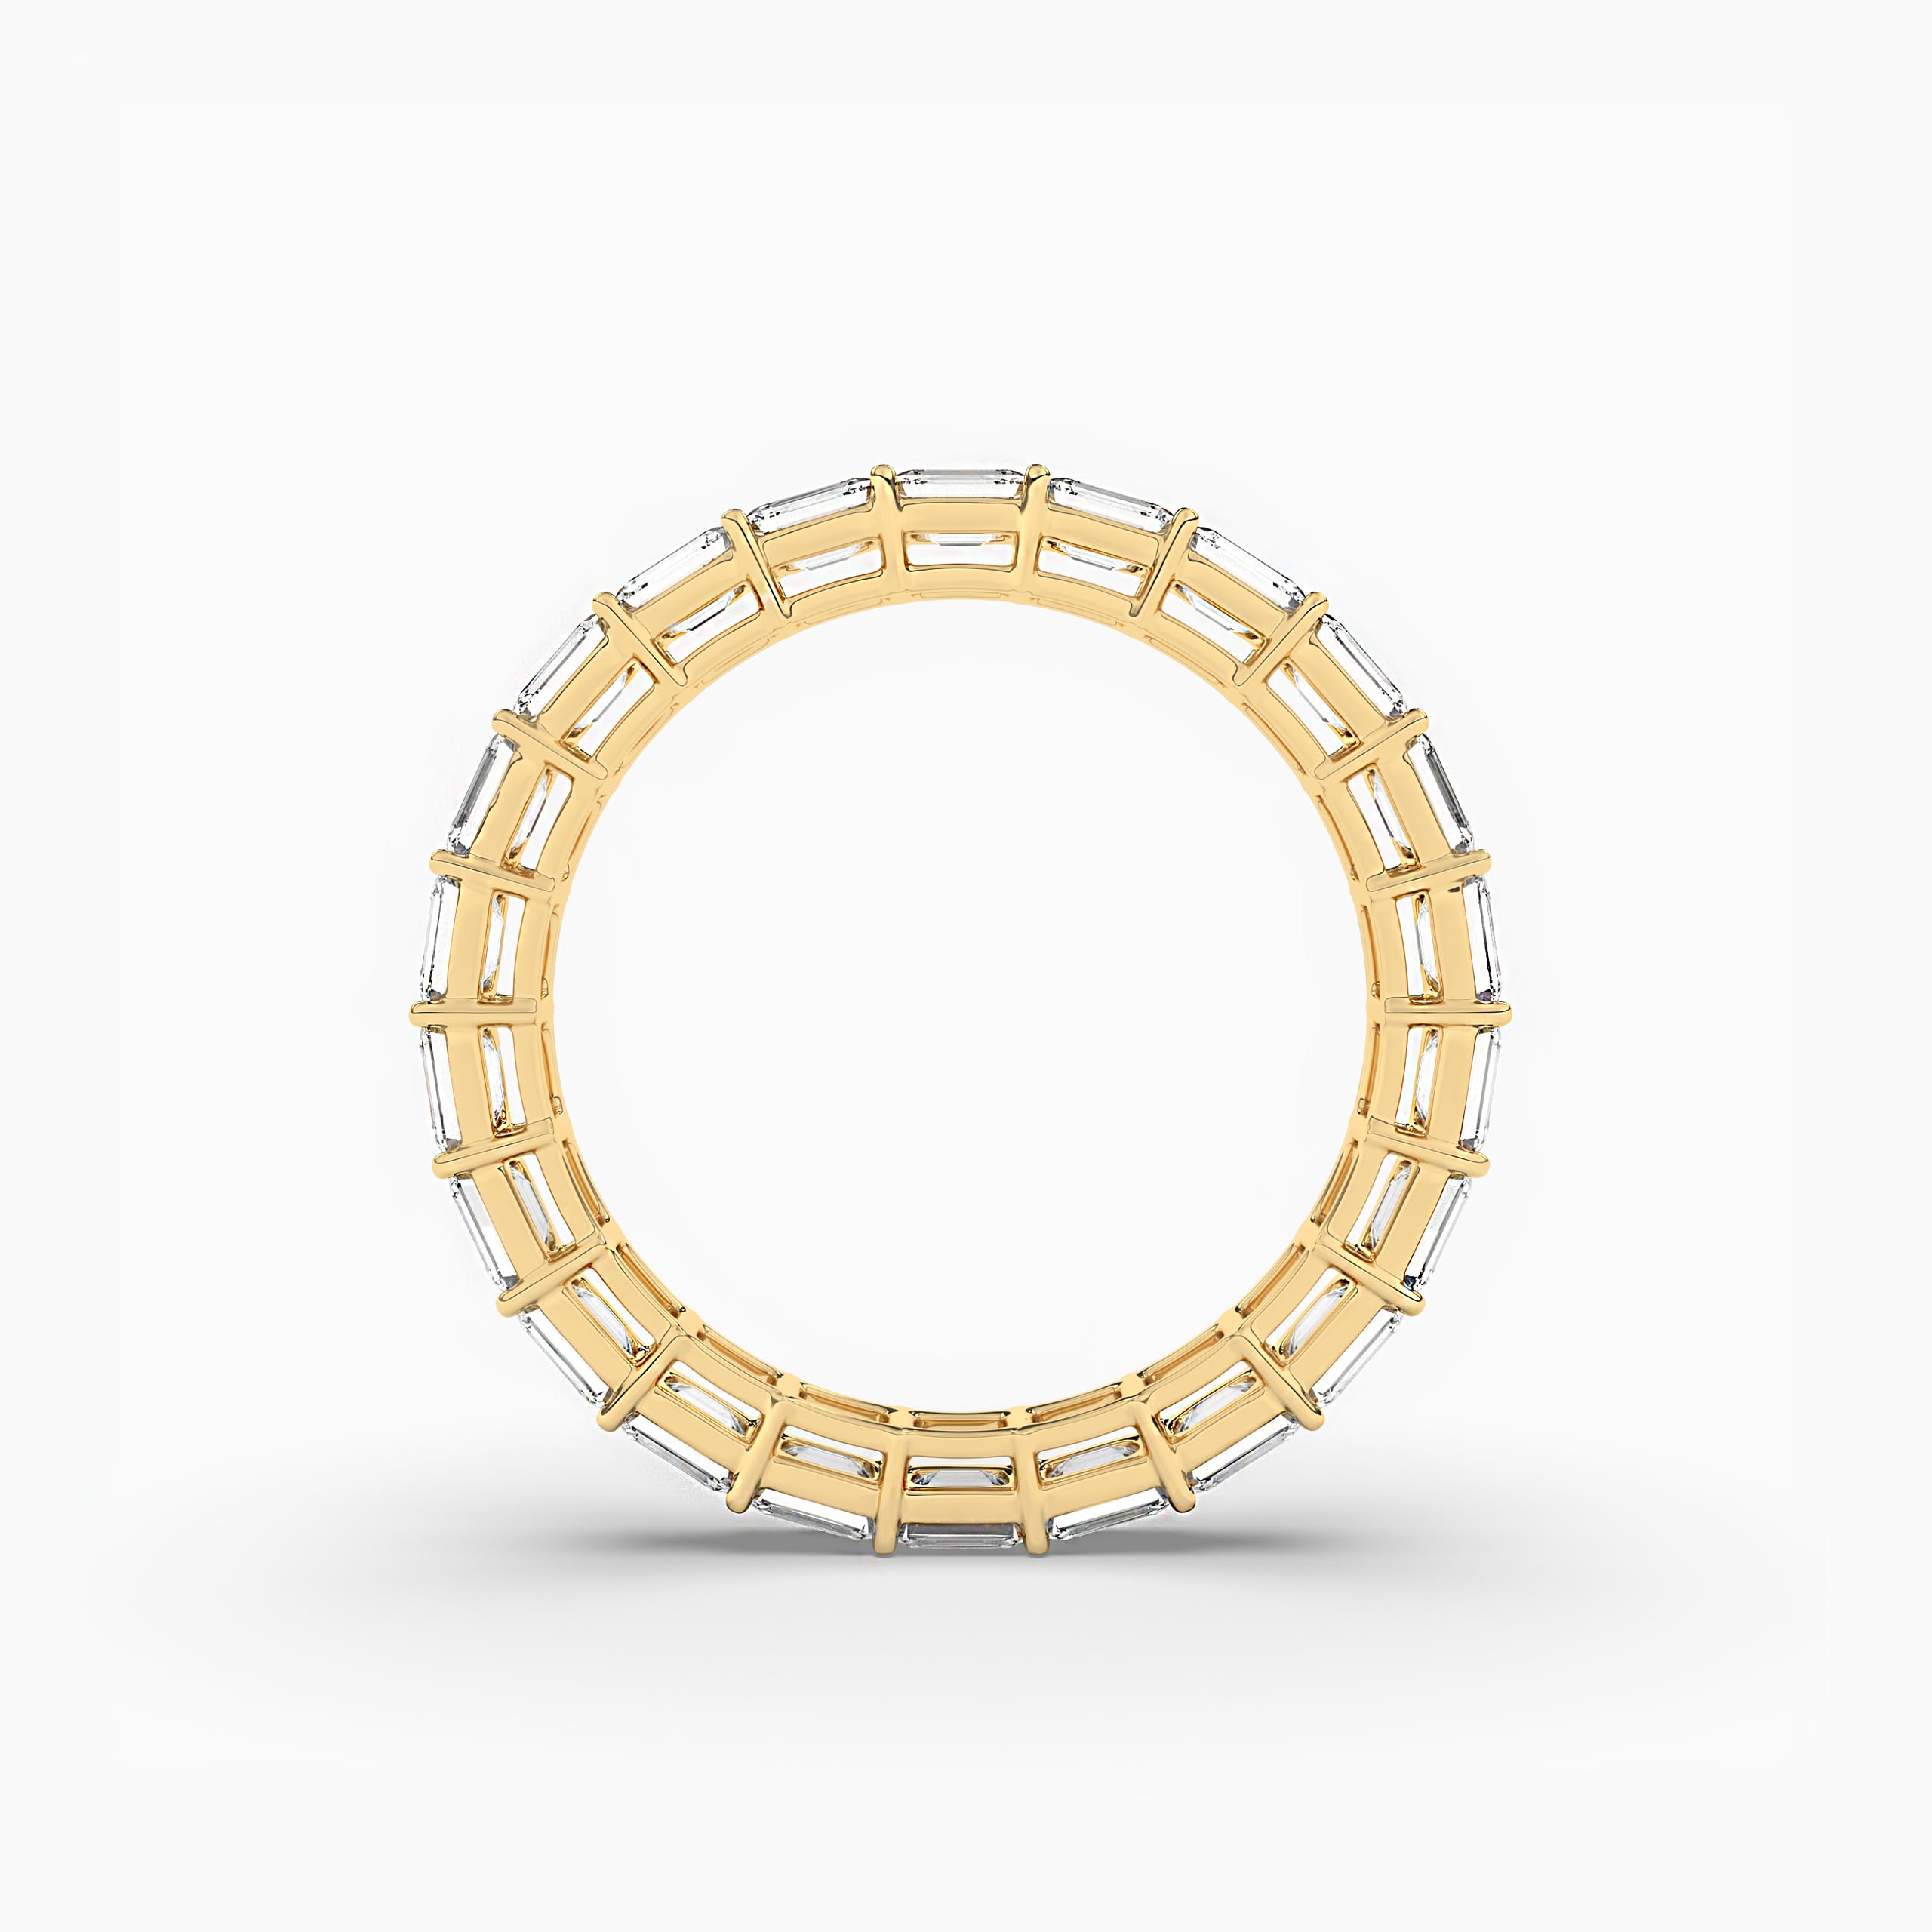 East West Emerald Cut Diamond in Eternity Ring In Yellow Gold